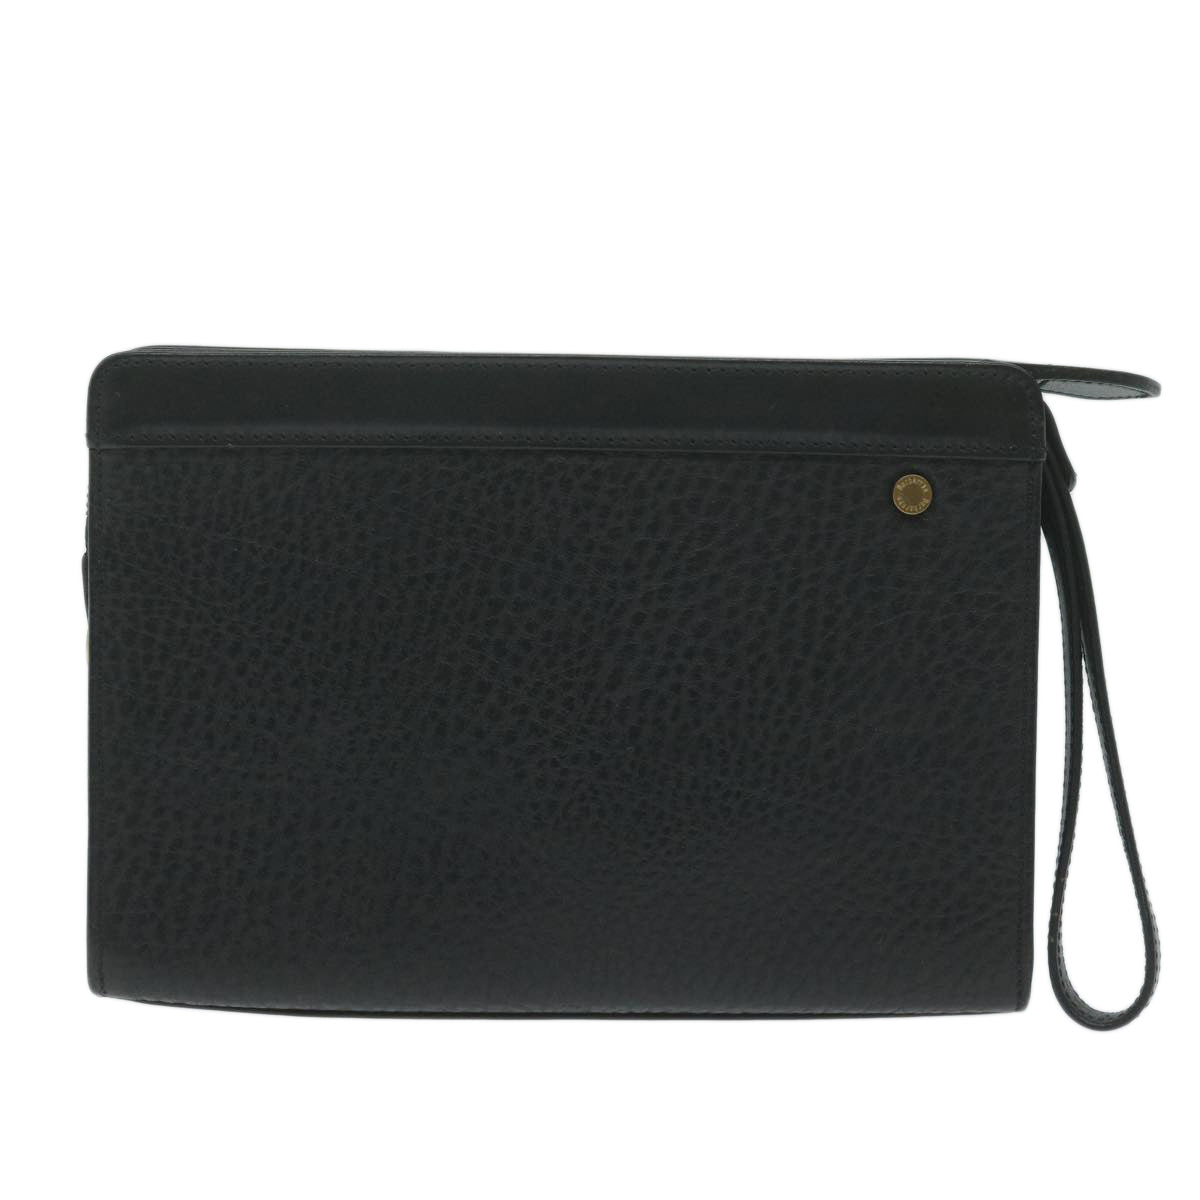 Burberrys Clutch Bag Leather Black Auth bs11485 - 0